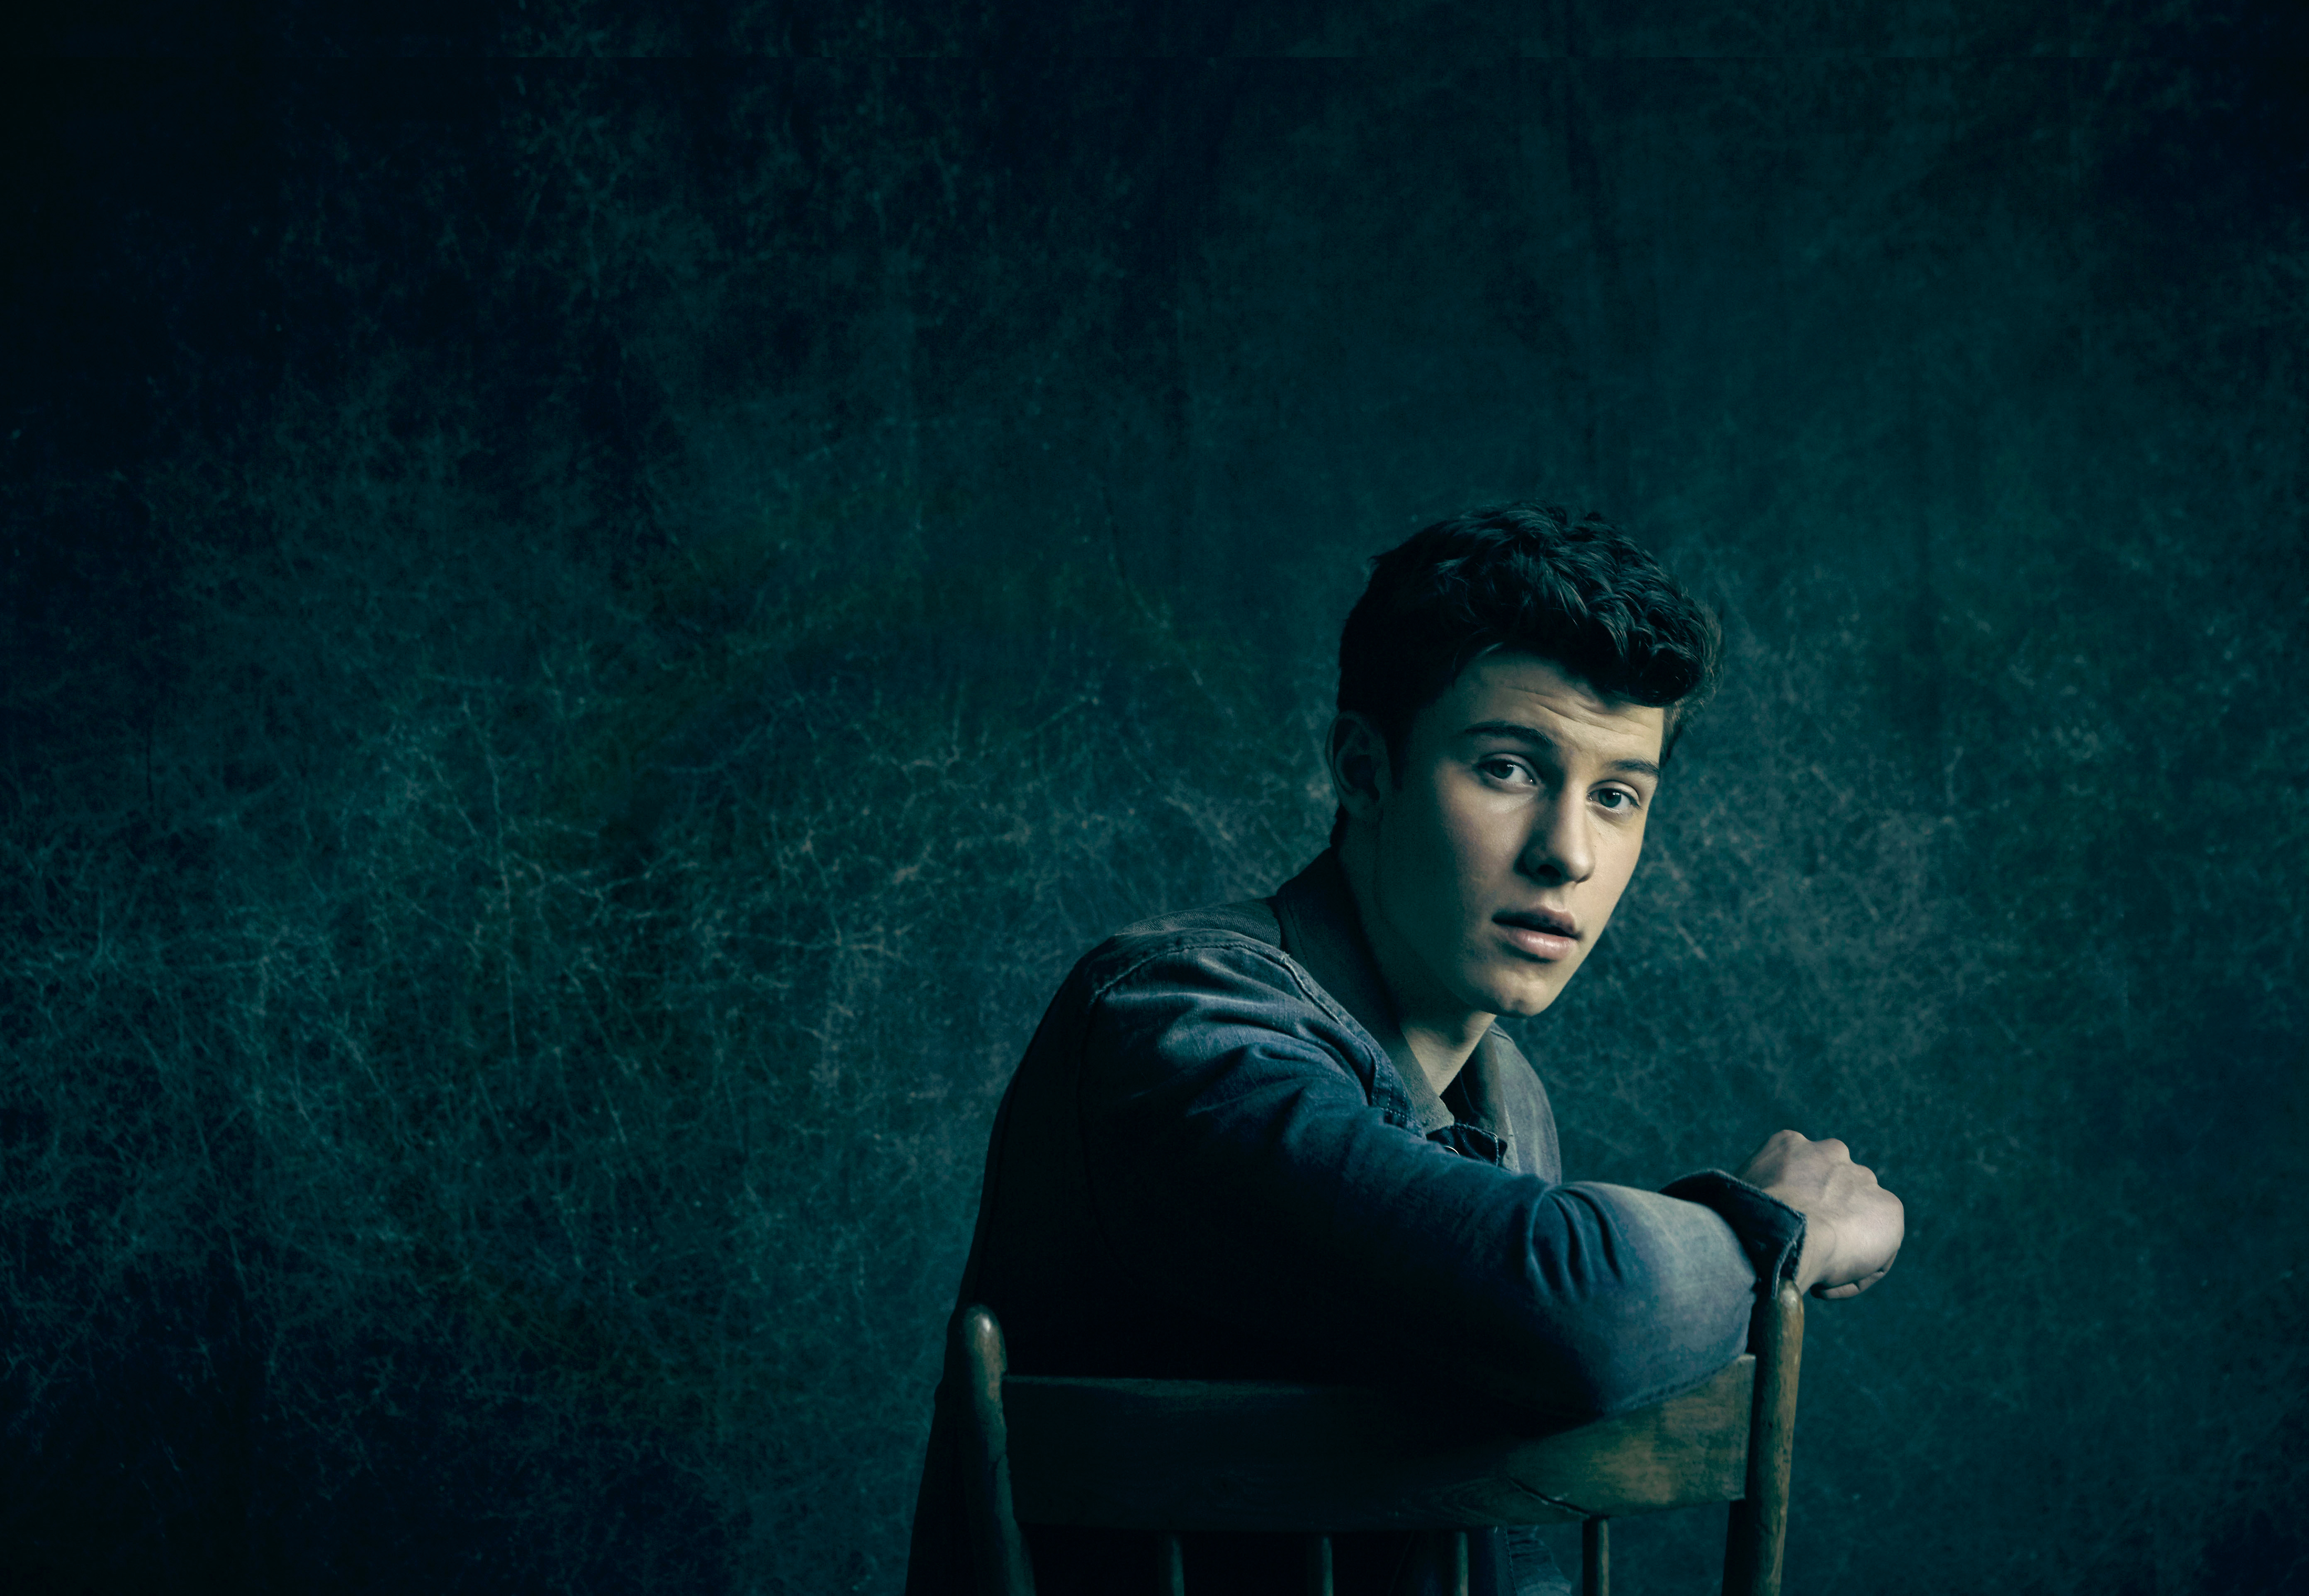 Shawn Mendes Wallpaper Gallery Yopriceville High Quality